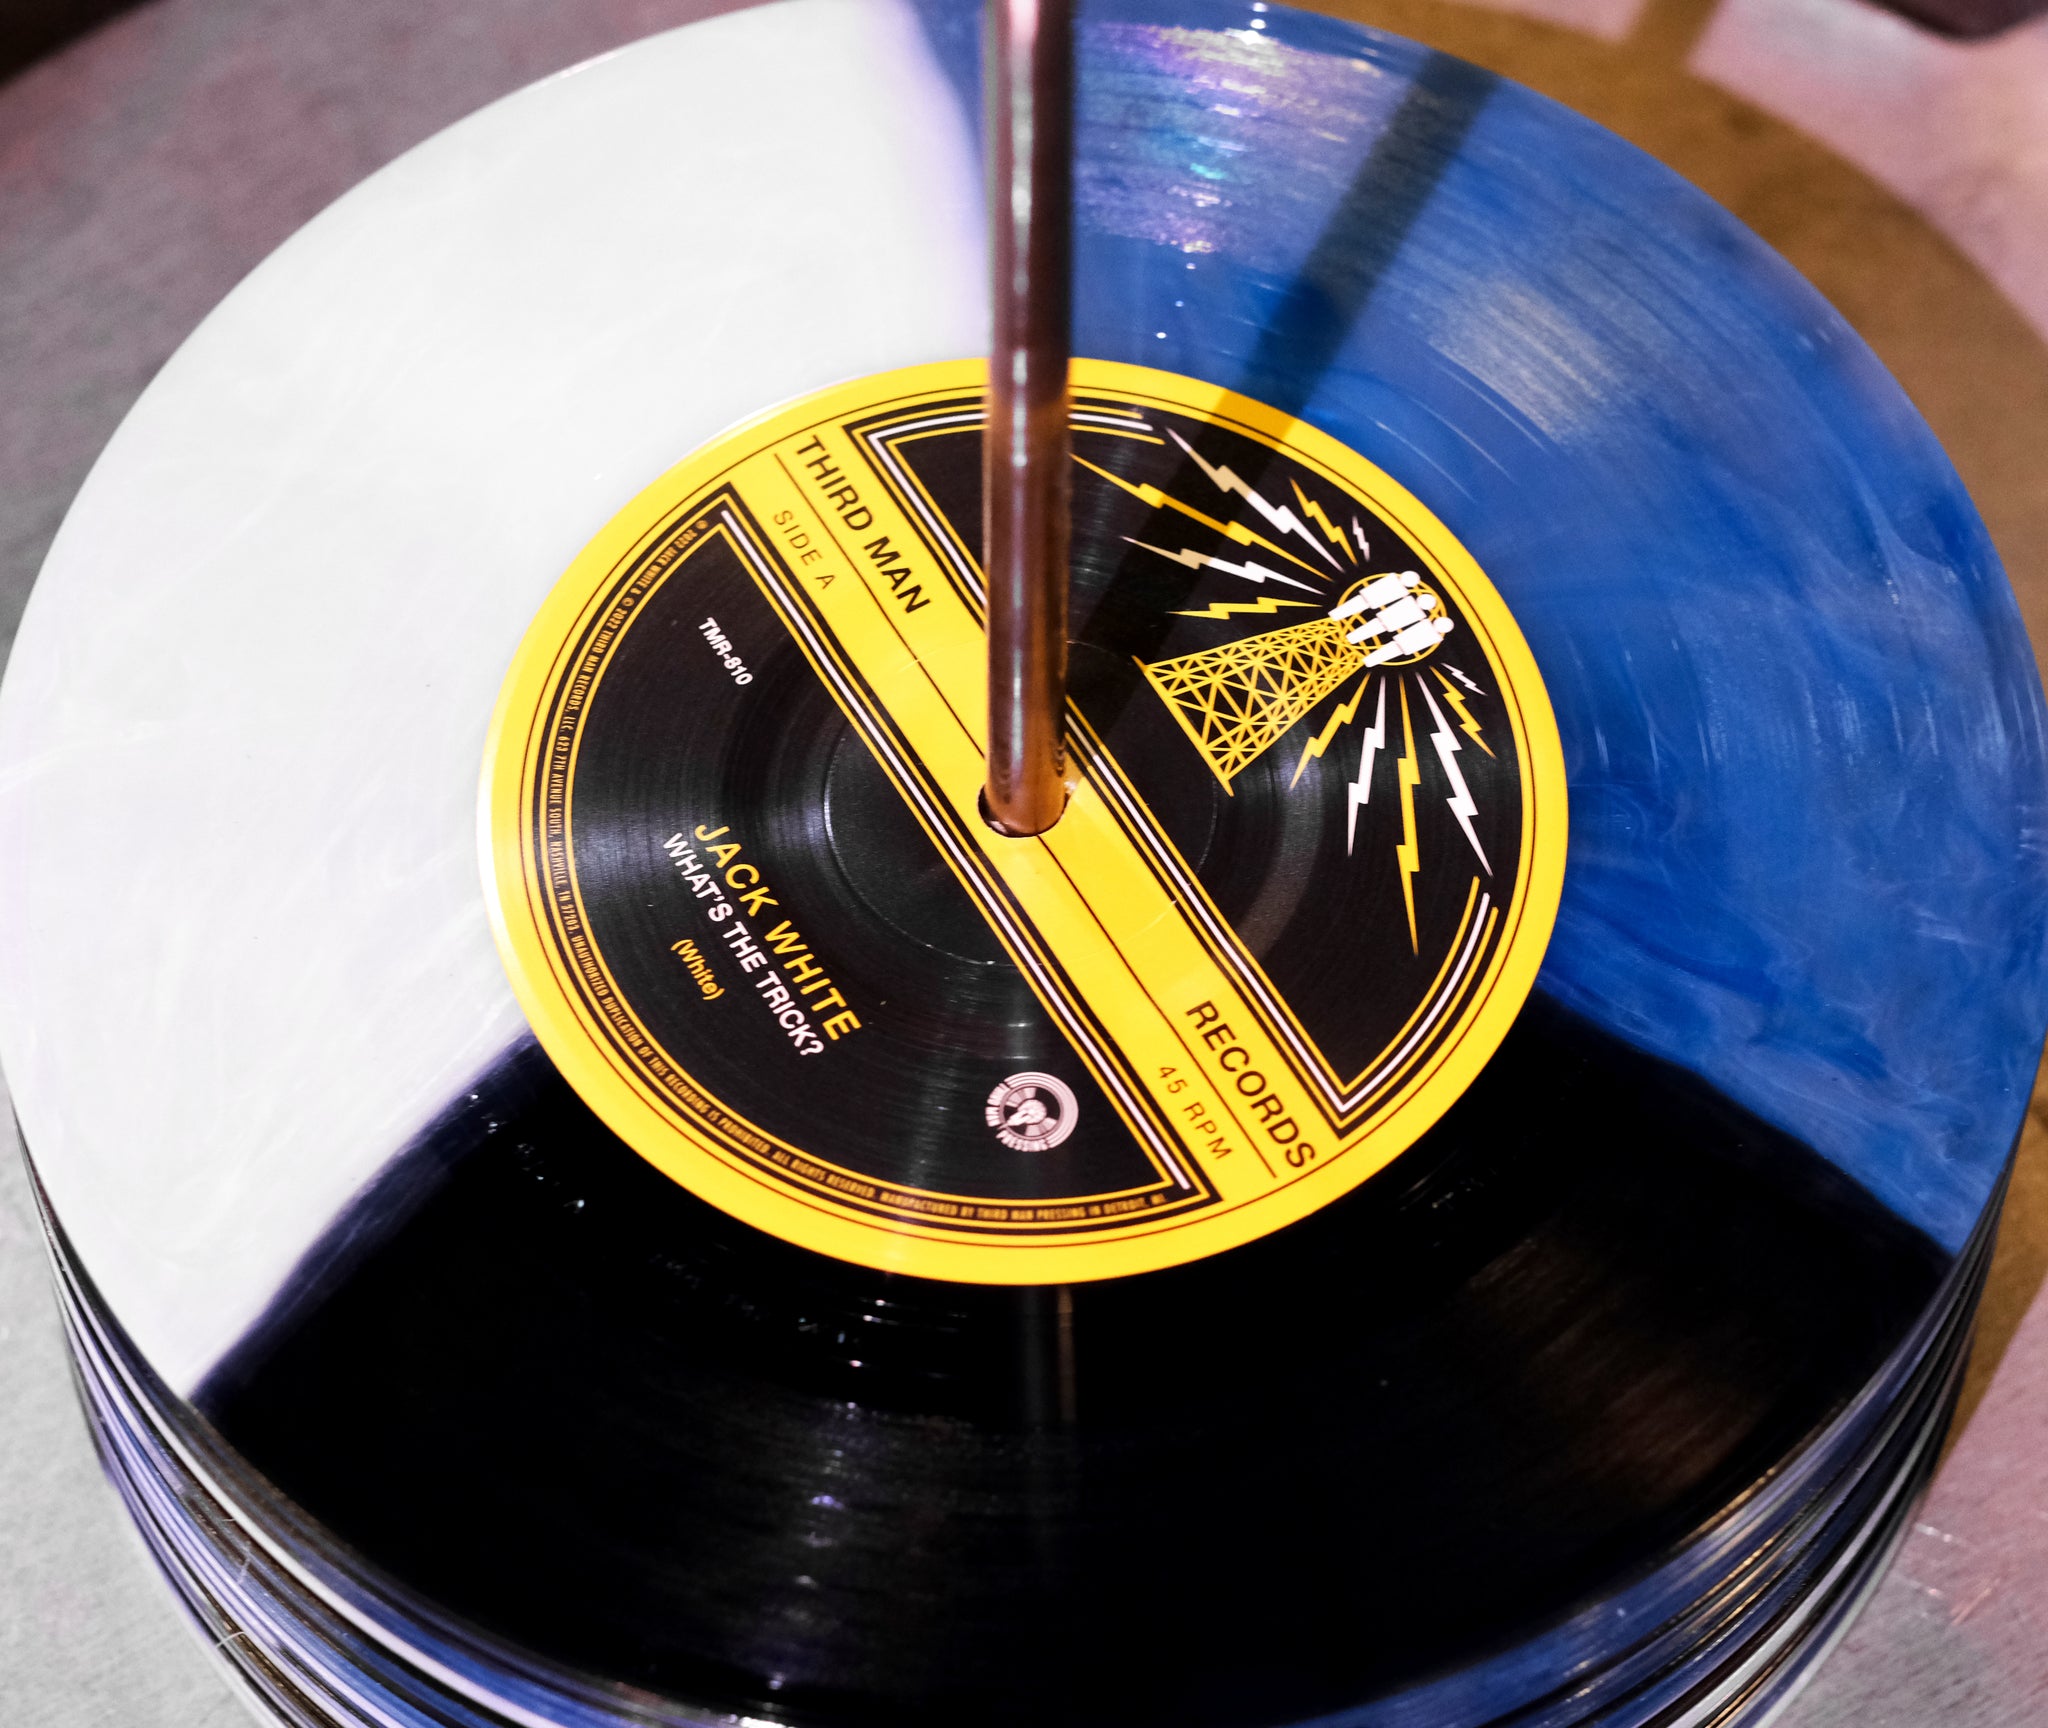 What’s The Trick? (Limited Edition Tri-Color Vinyl)